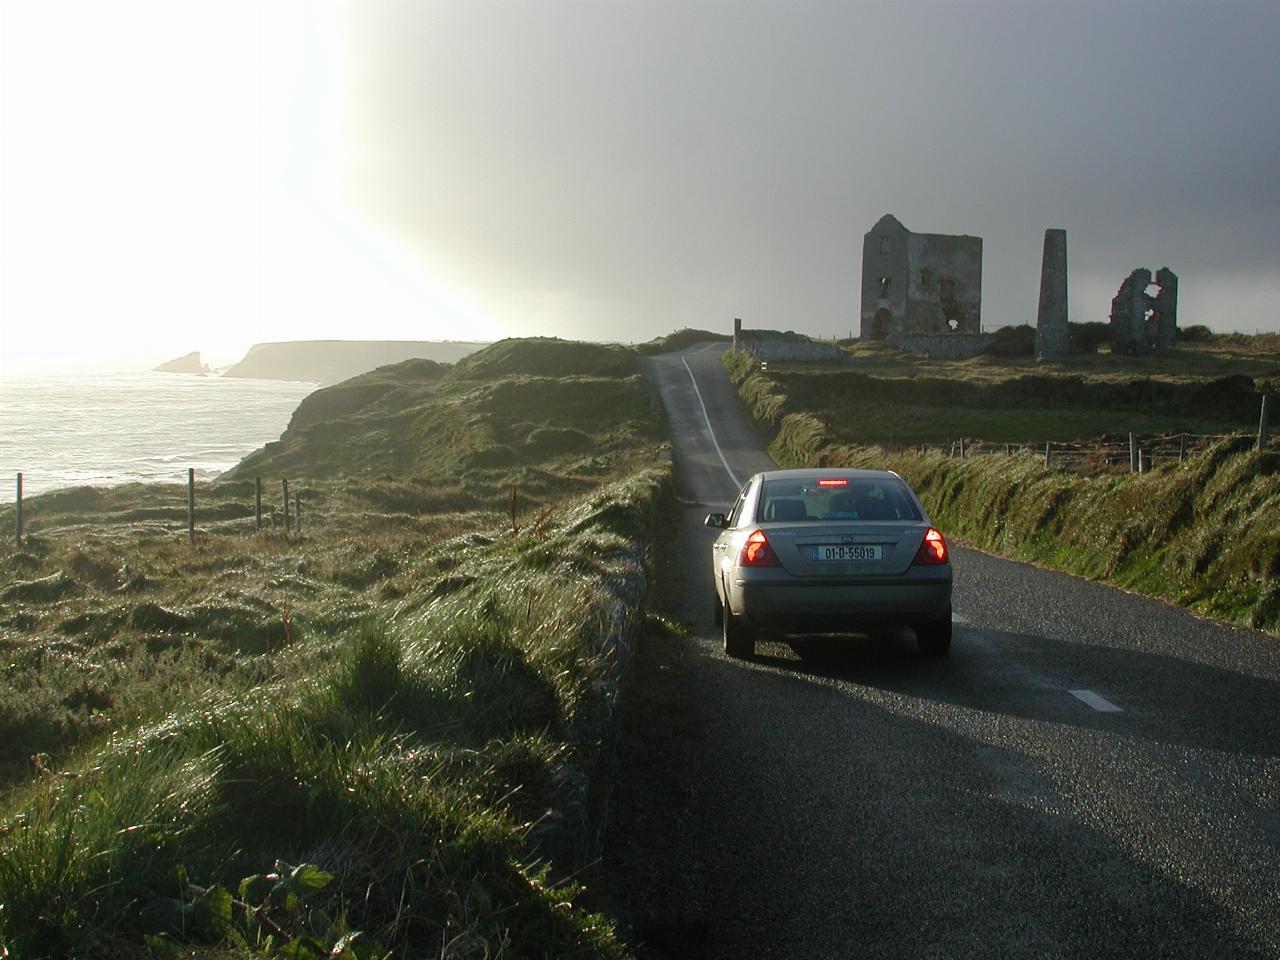 Near Bunmahon west of Tramore